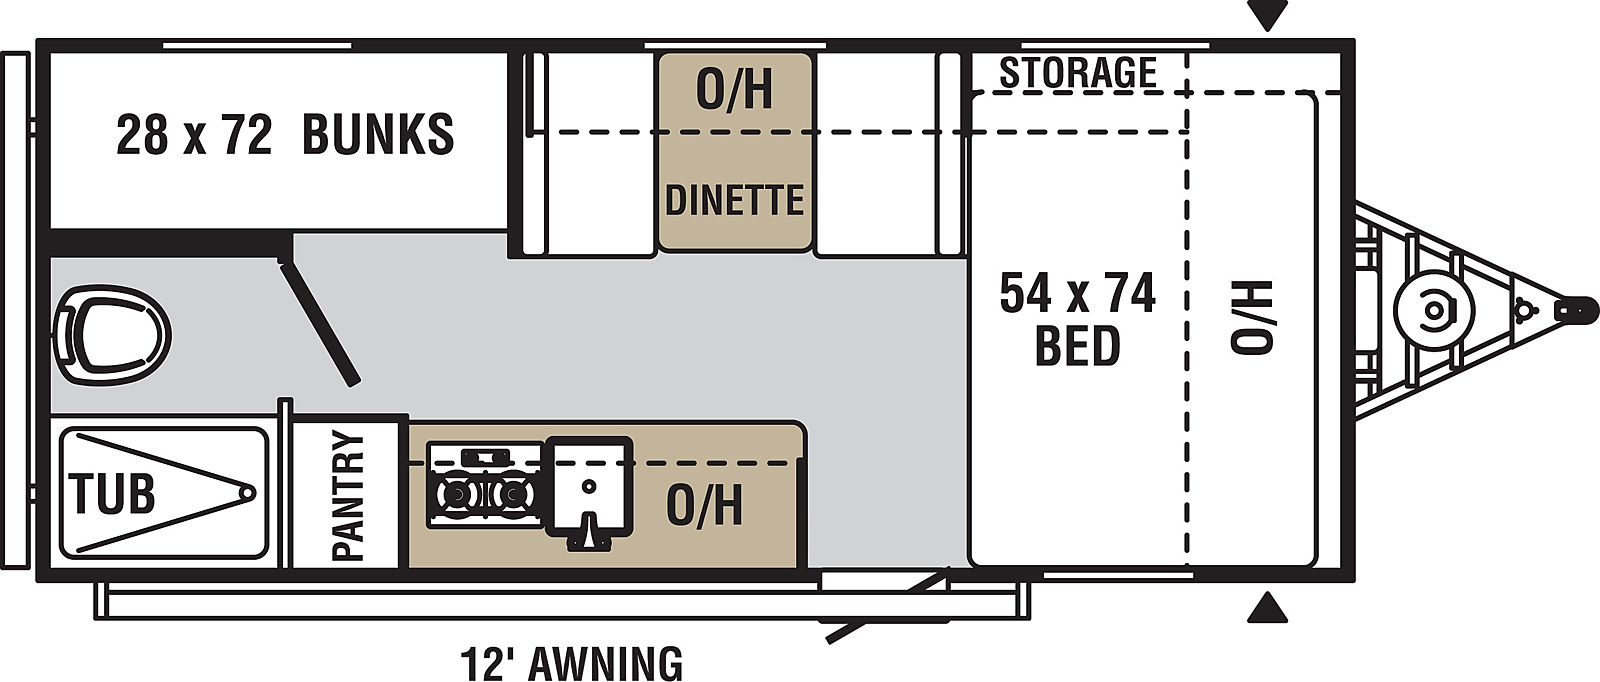 Viking Ultra-Lite 17SBH floorplan. The 17SBH has no slide outs and one entry door.